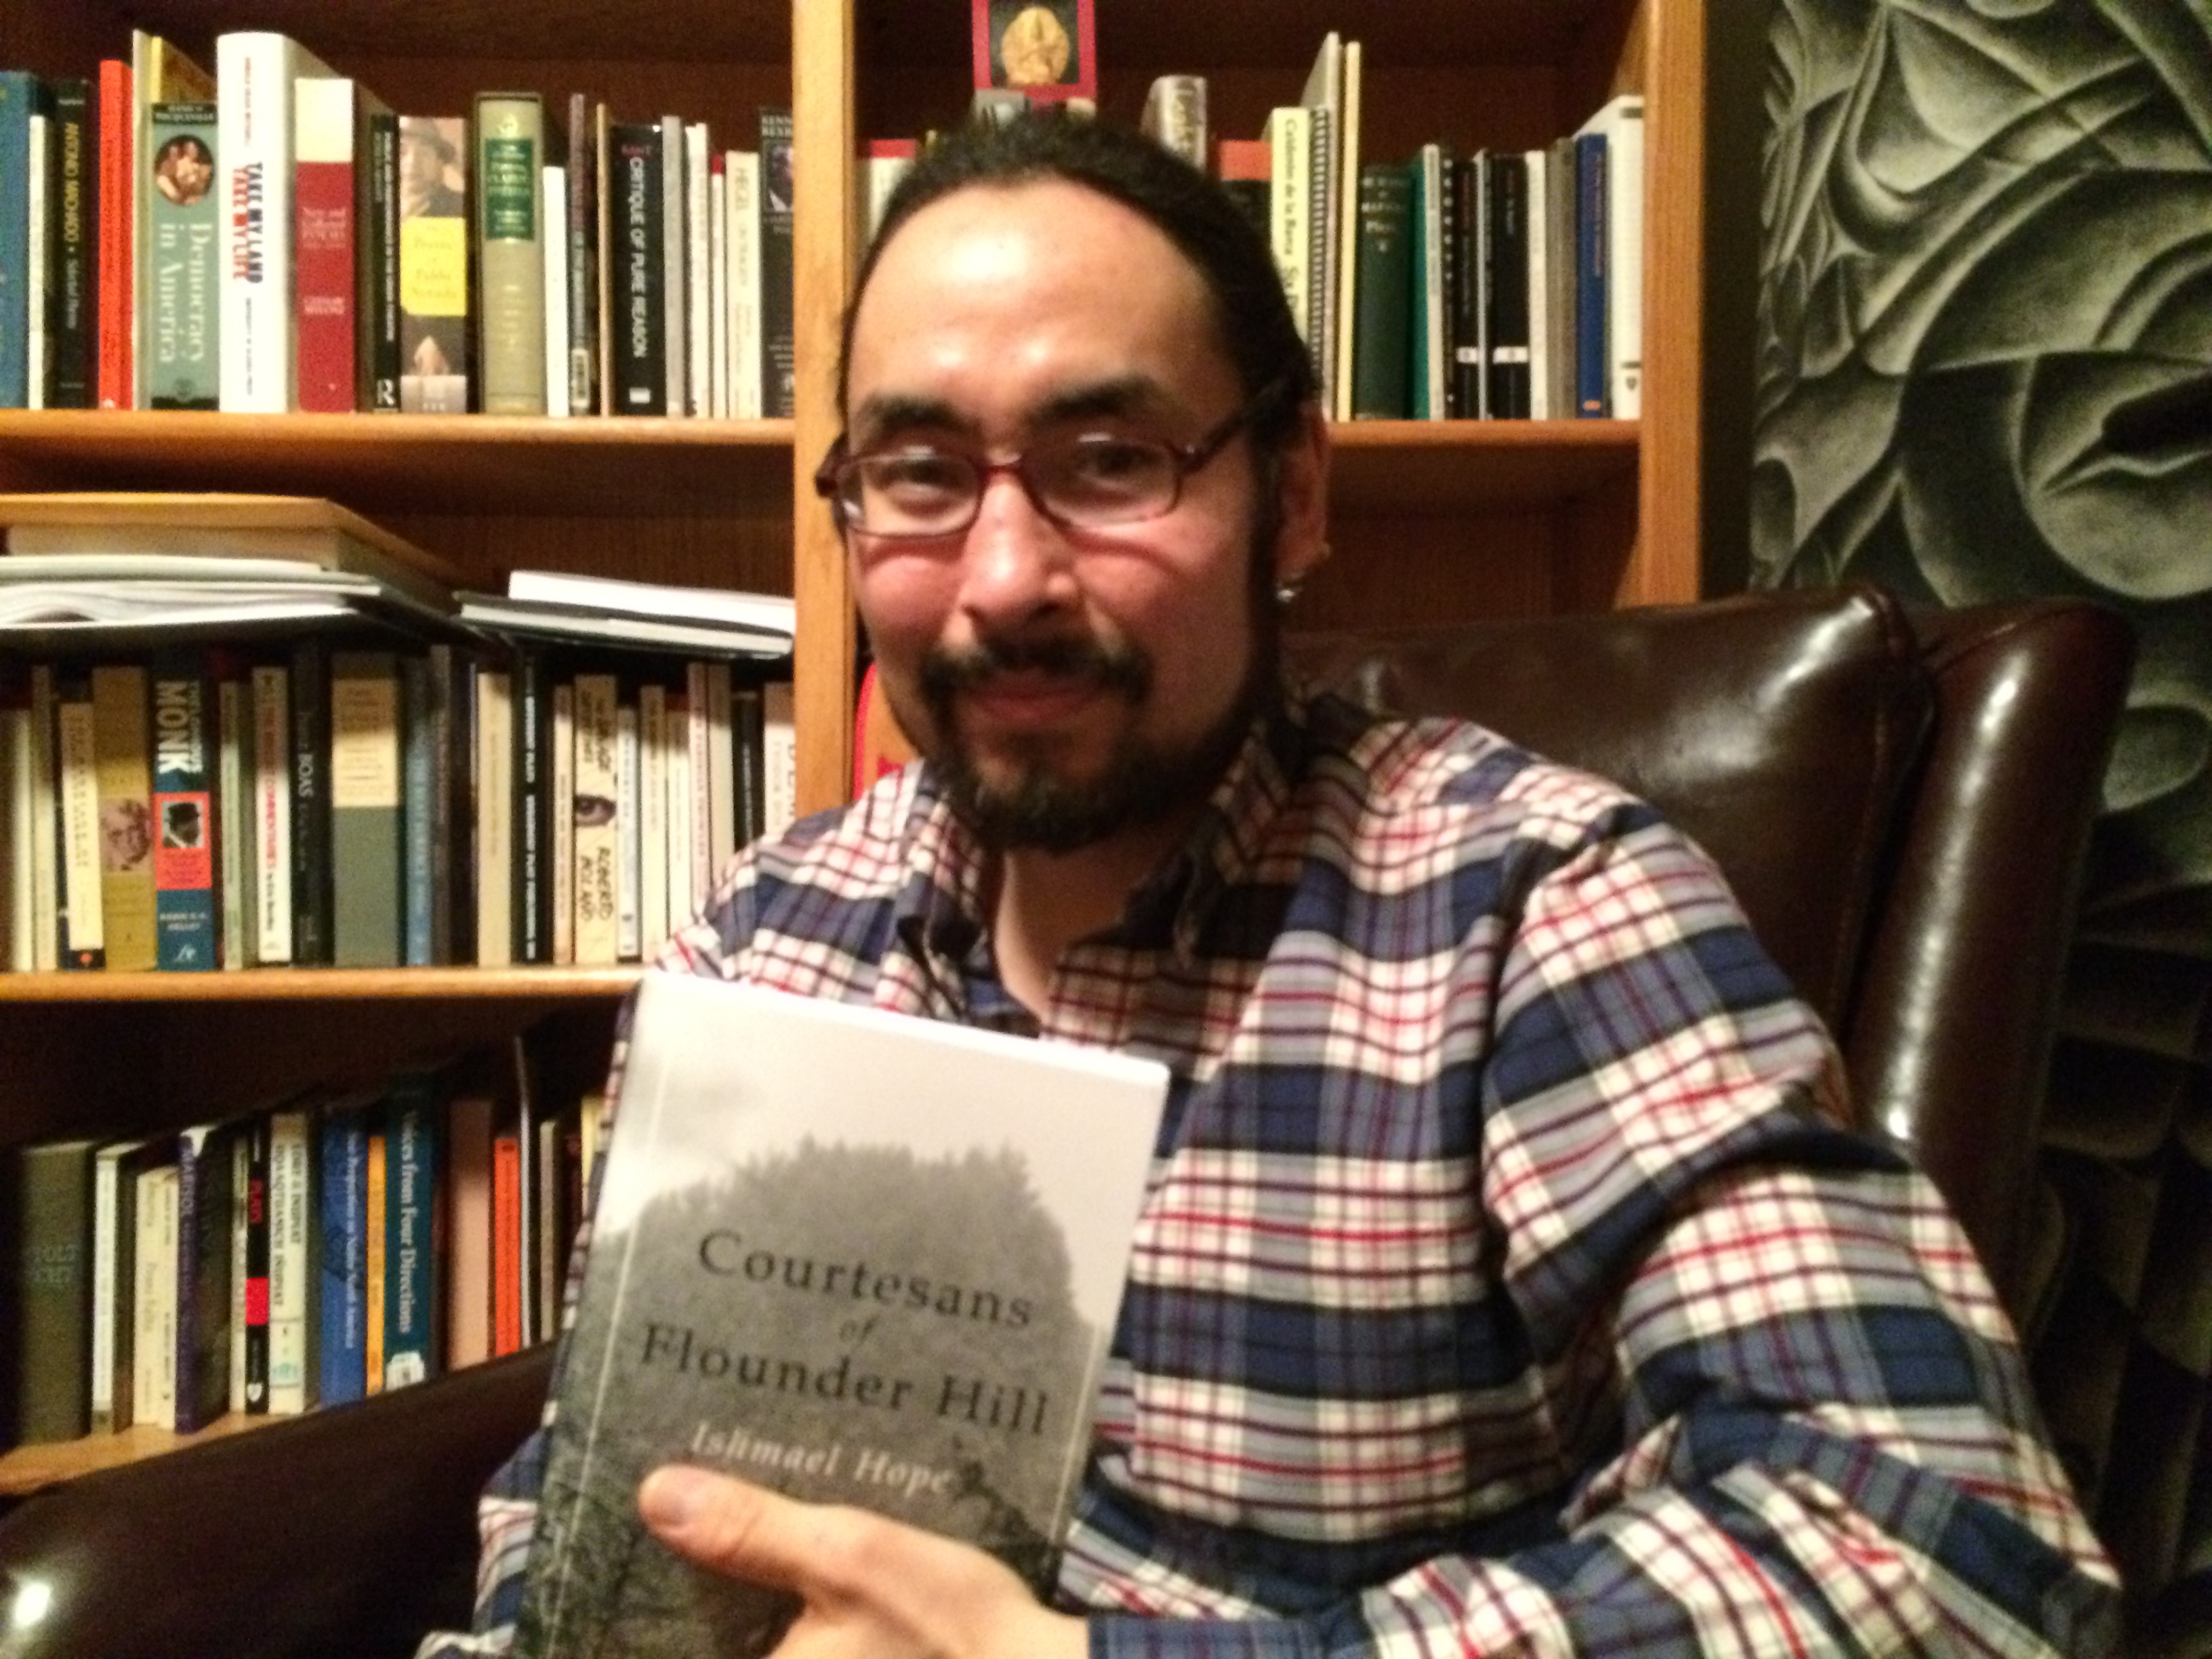 Tlingit and Iñupiaq poet Ishmael Hope with his first collection of poetry "The Courtesans of Flounder Hill". (Photo by Scott Burton/KTOO)